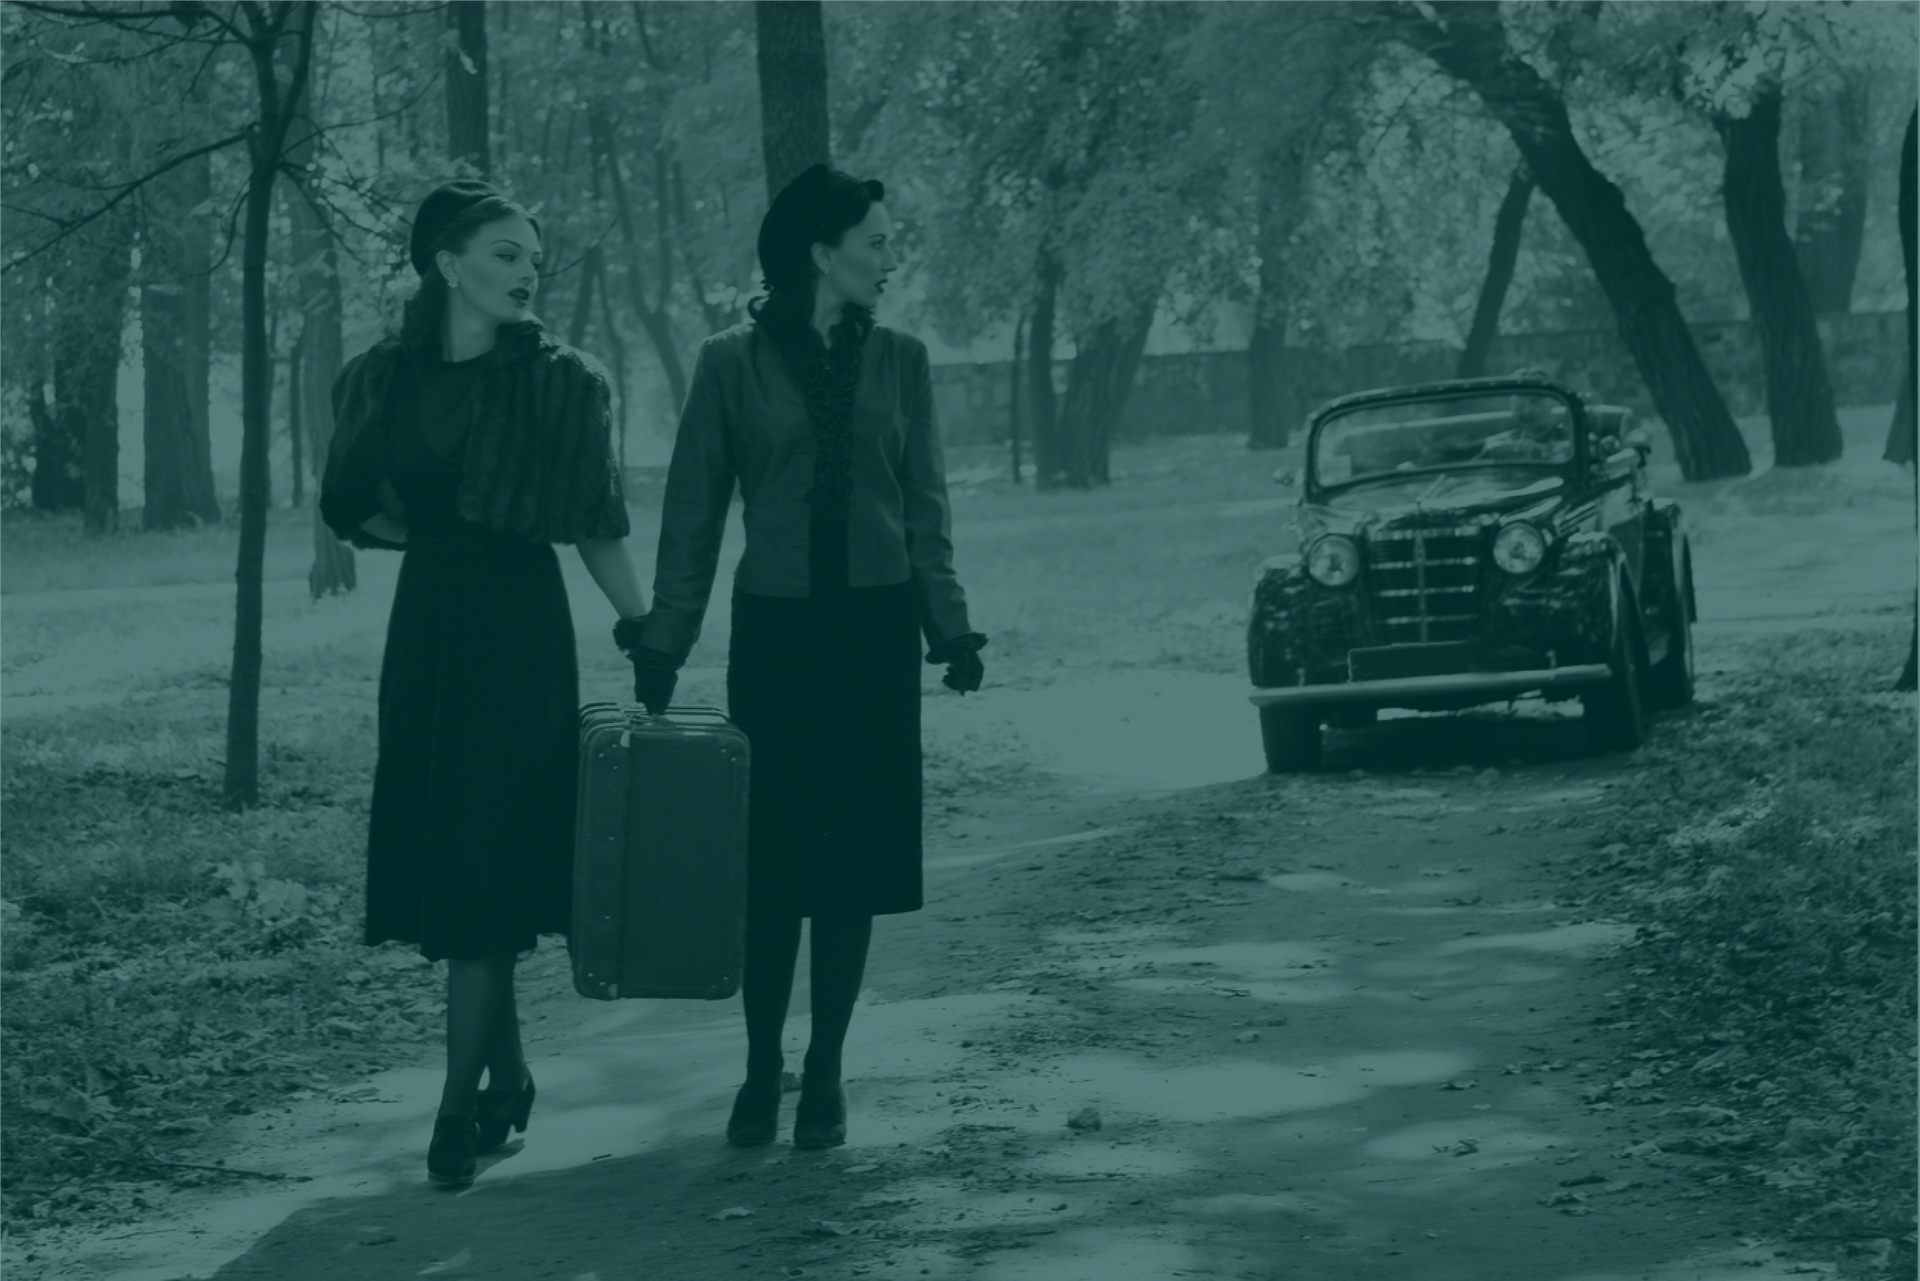 Two women in black dresses on a dirt road carrying a suitcase with a car in the background